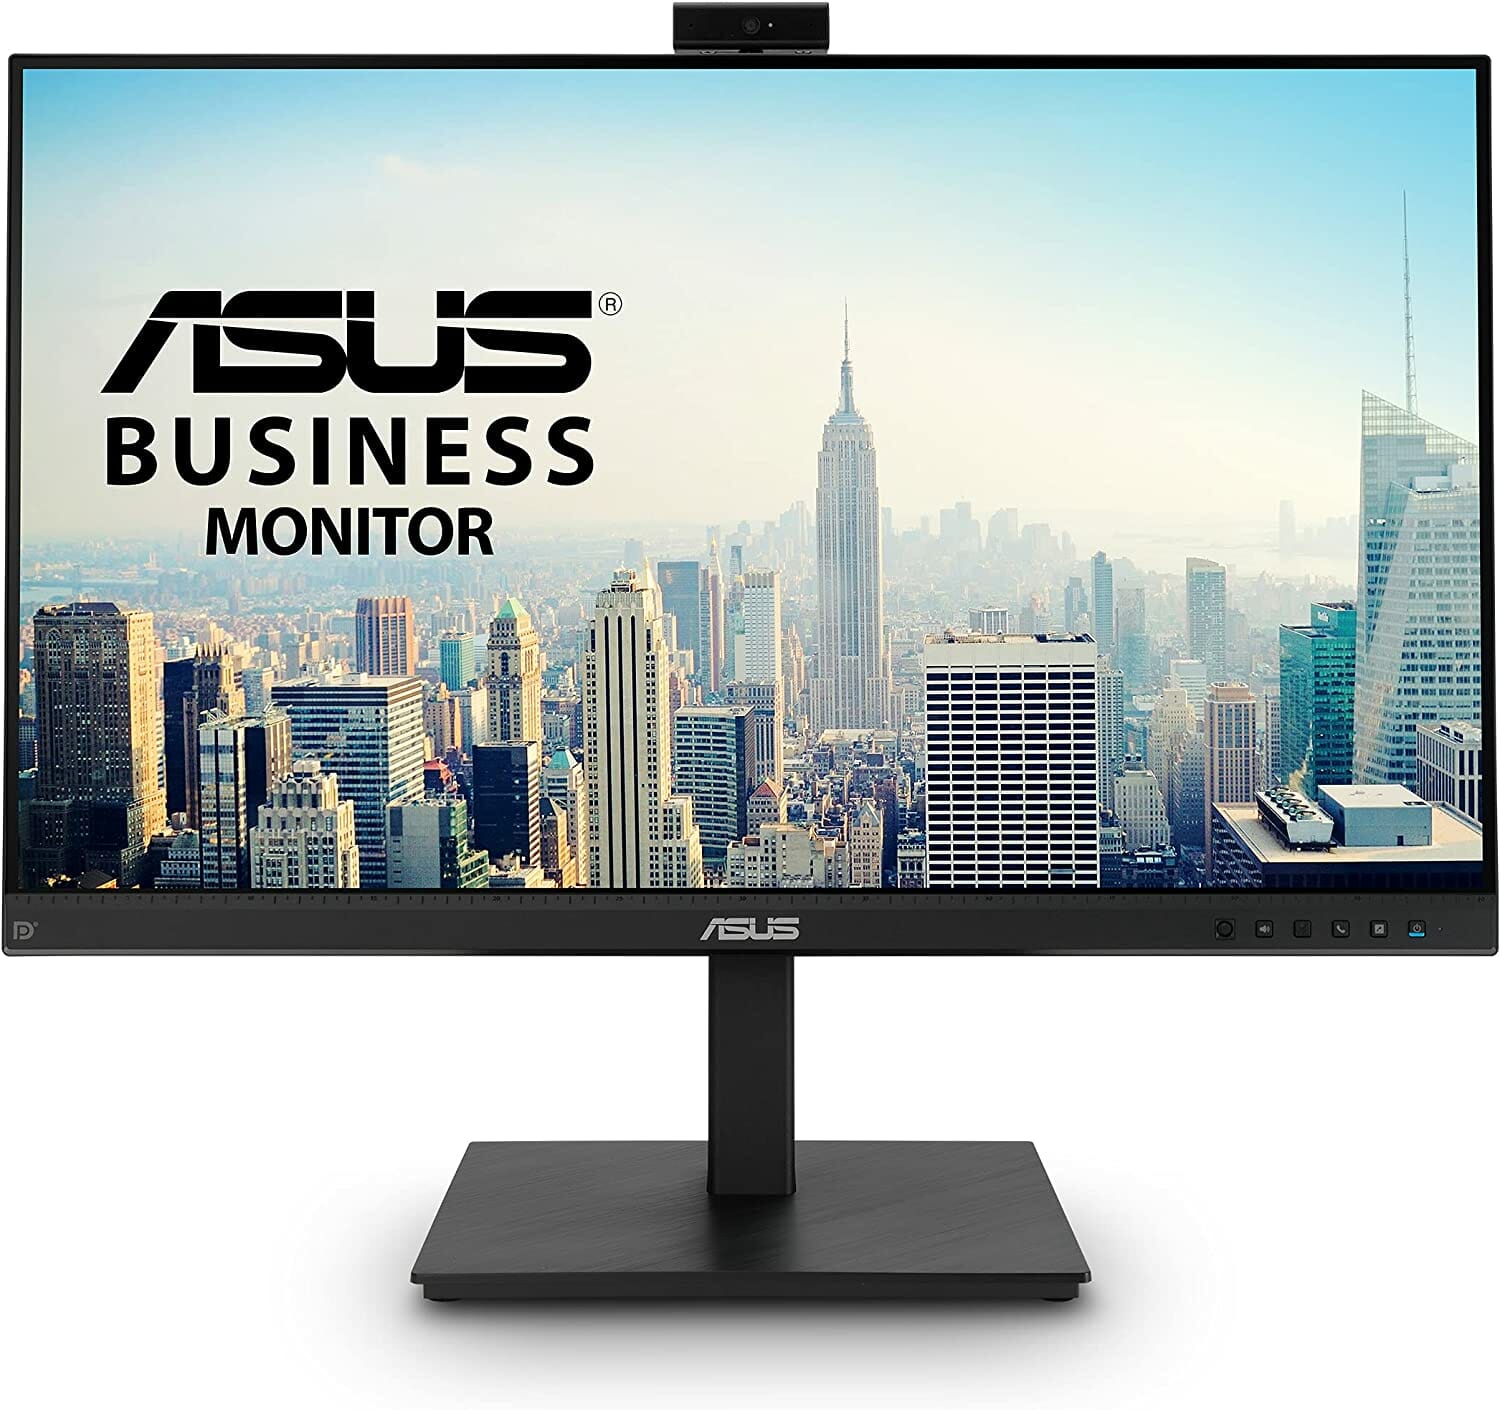  ASUS 27” 1080P Video Conference Monitor